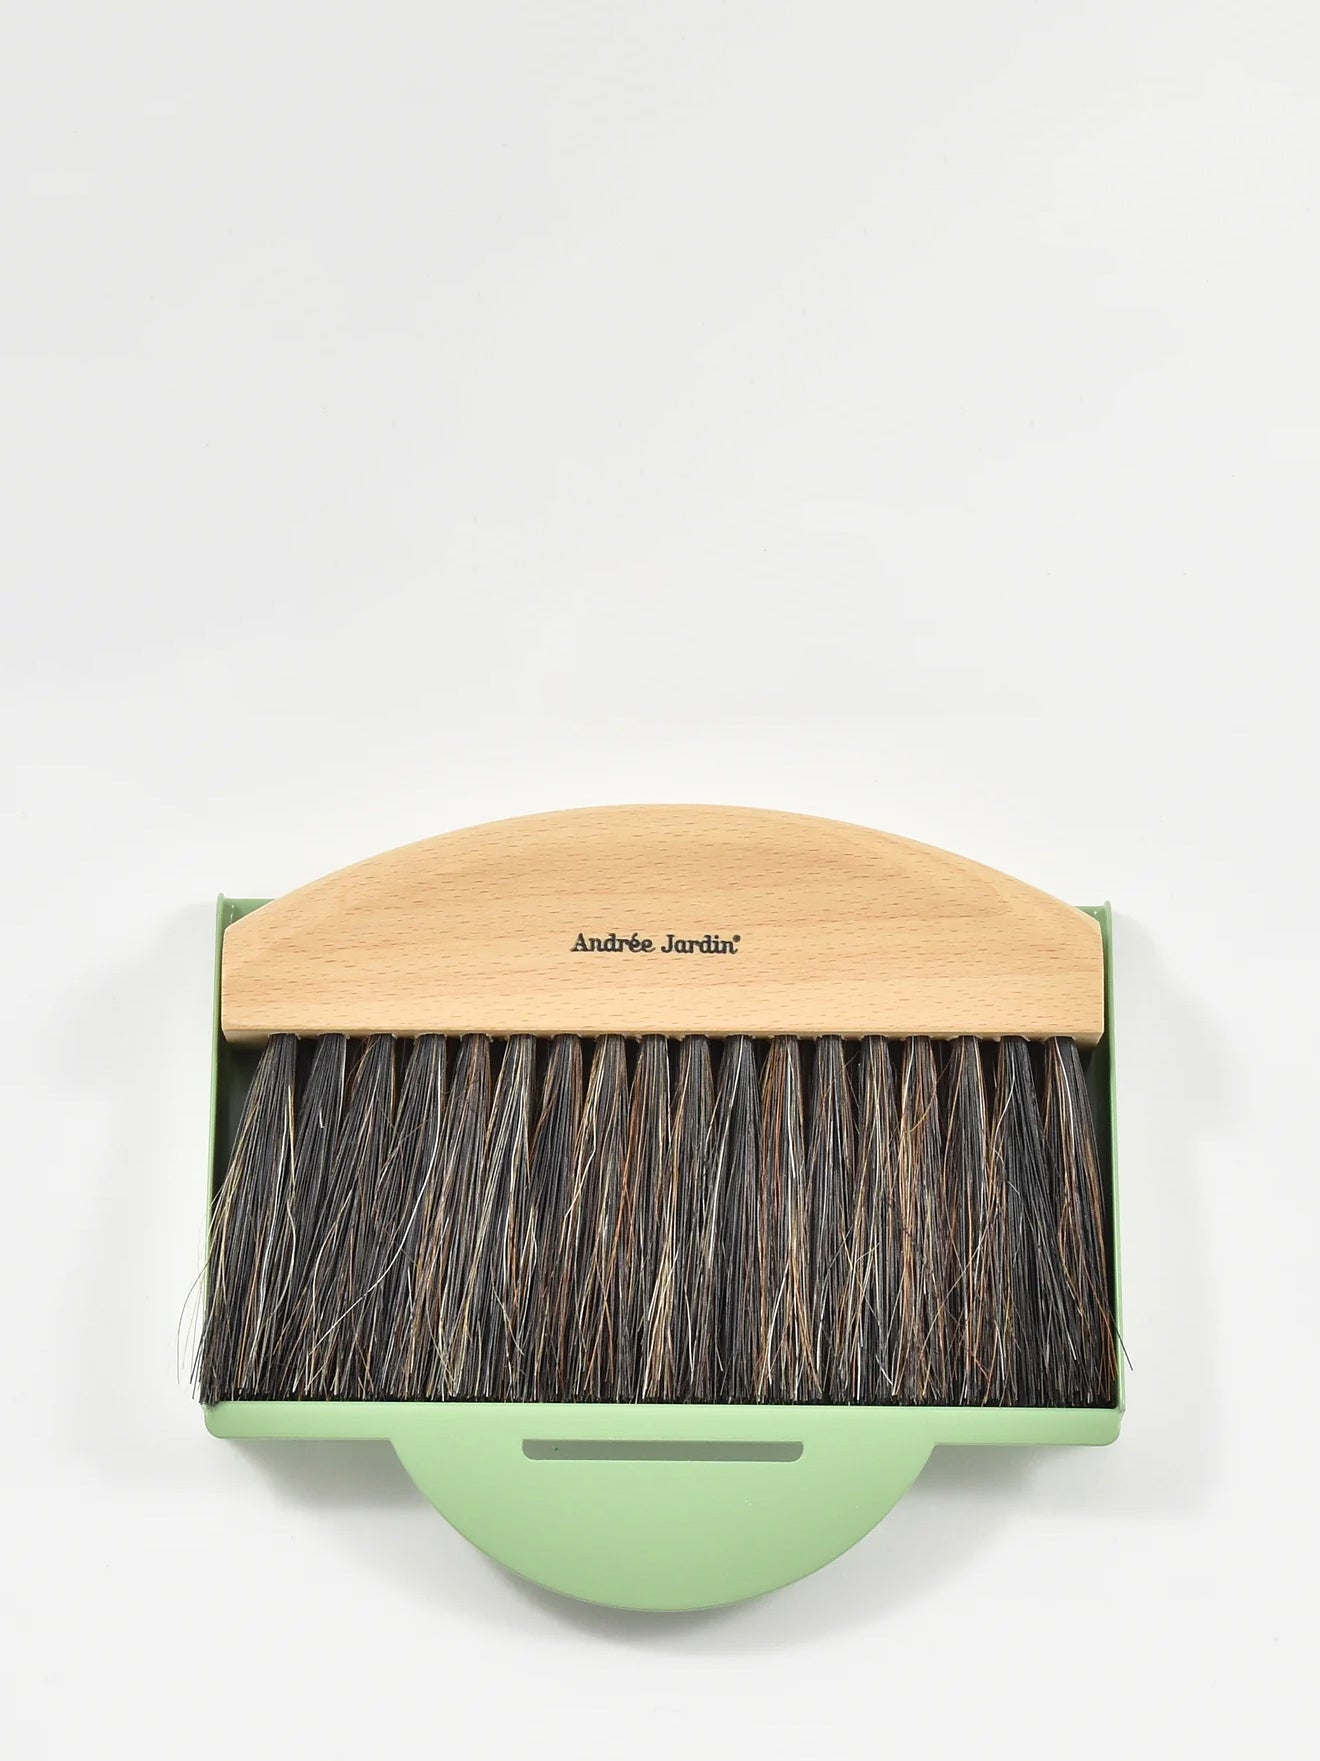 Table dustpan and brush set, sage green